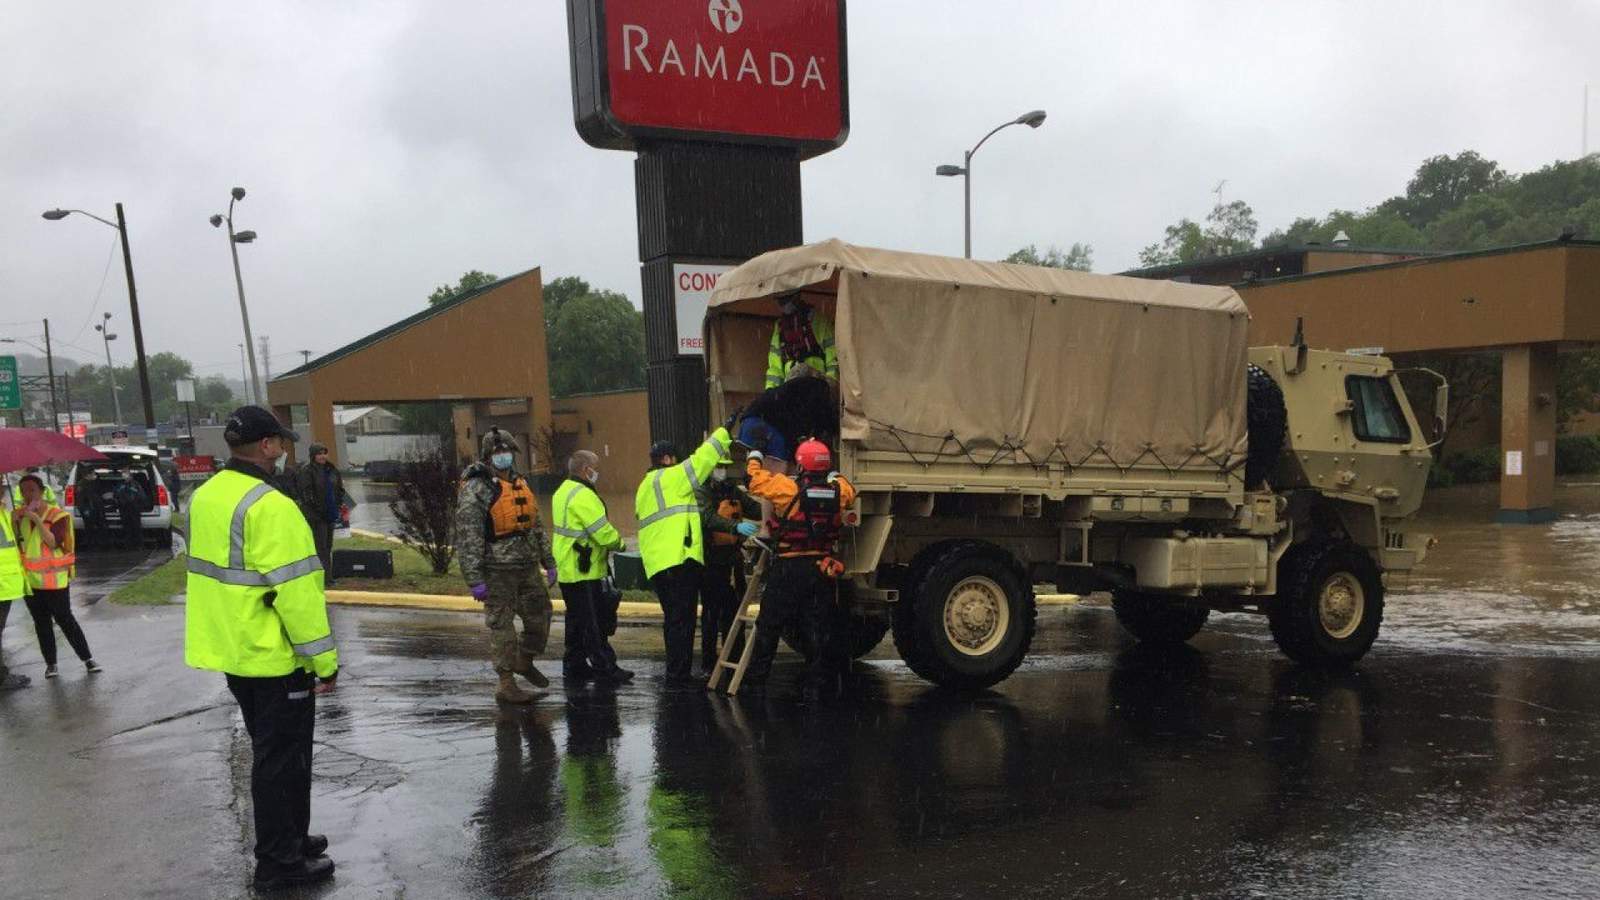 Residents evacuated from Ramada near Roanoke River due to flooding concerns